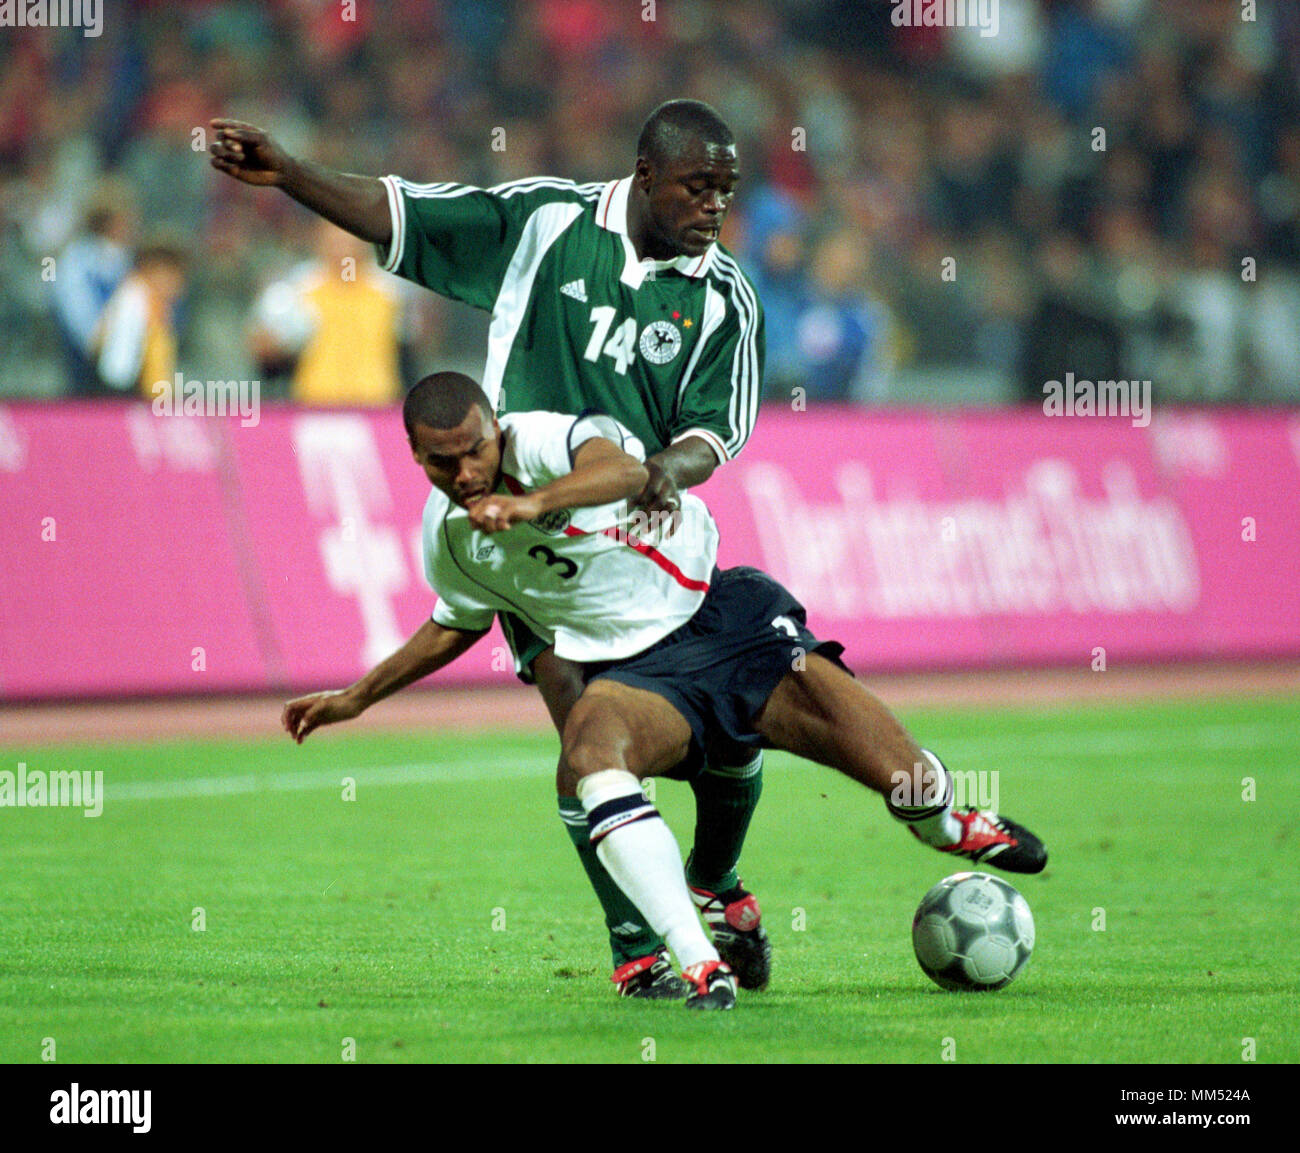 Football: Olympia Stadion Munich Germany 1.9.2001, FIFA World Cup 2002 qualifier Germany (green) vs England (white) 1:5 ---- Gerald ASAMOAH and Ashley COLE Stock Photo